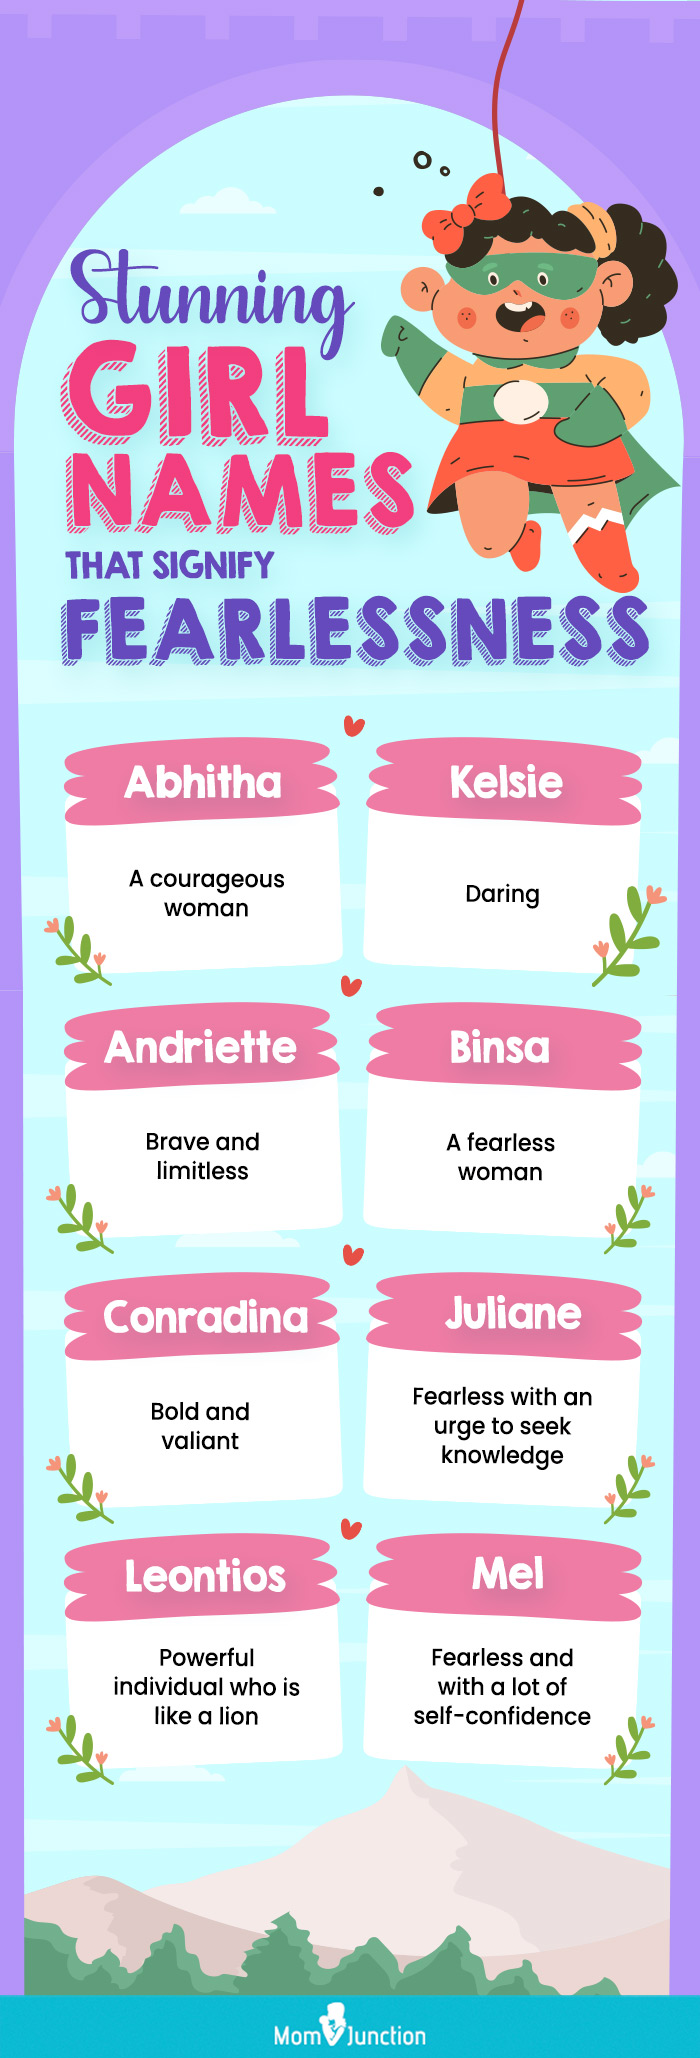 stunning girl names that signify fearlessness (infographic)